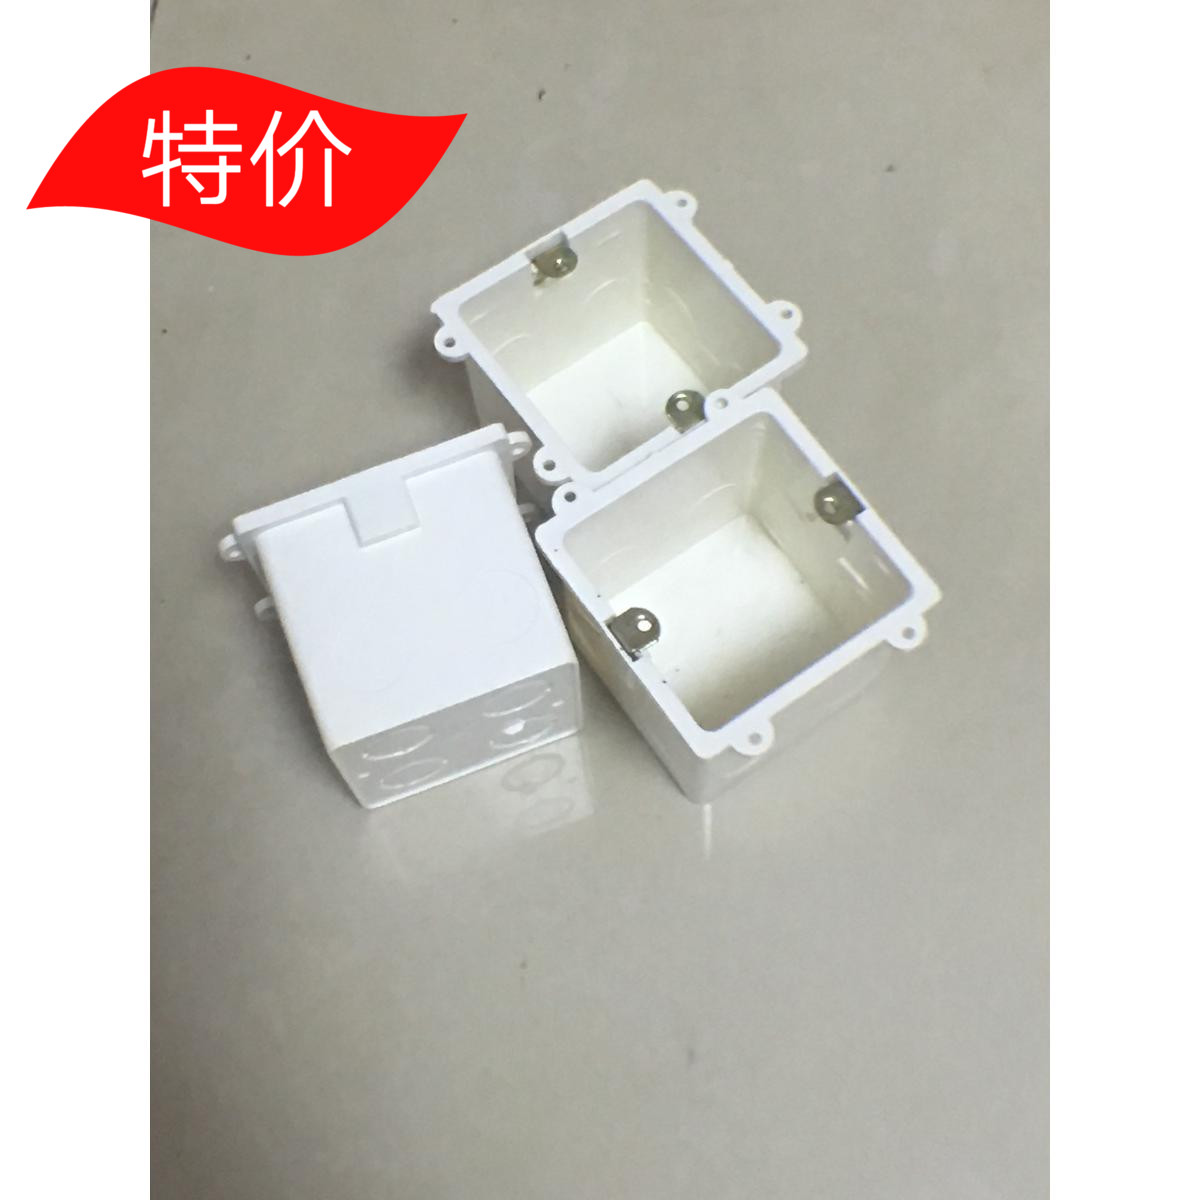 PVC Embedded Bottom Box 70 with Fixed Holes Embedded Cable Box Embedded Cable Box Embedded Switch Box Connection Box